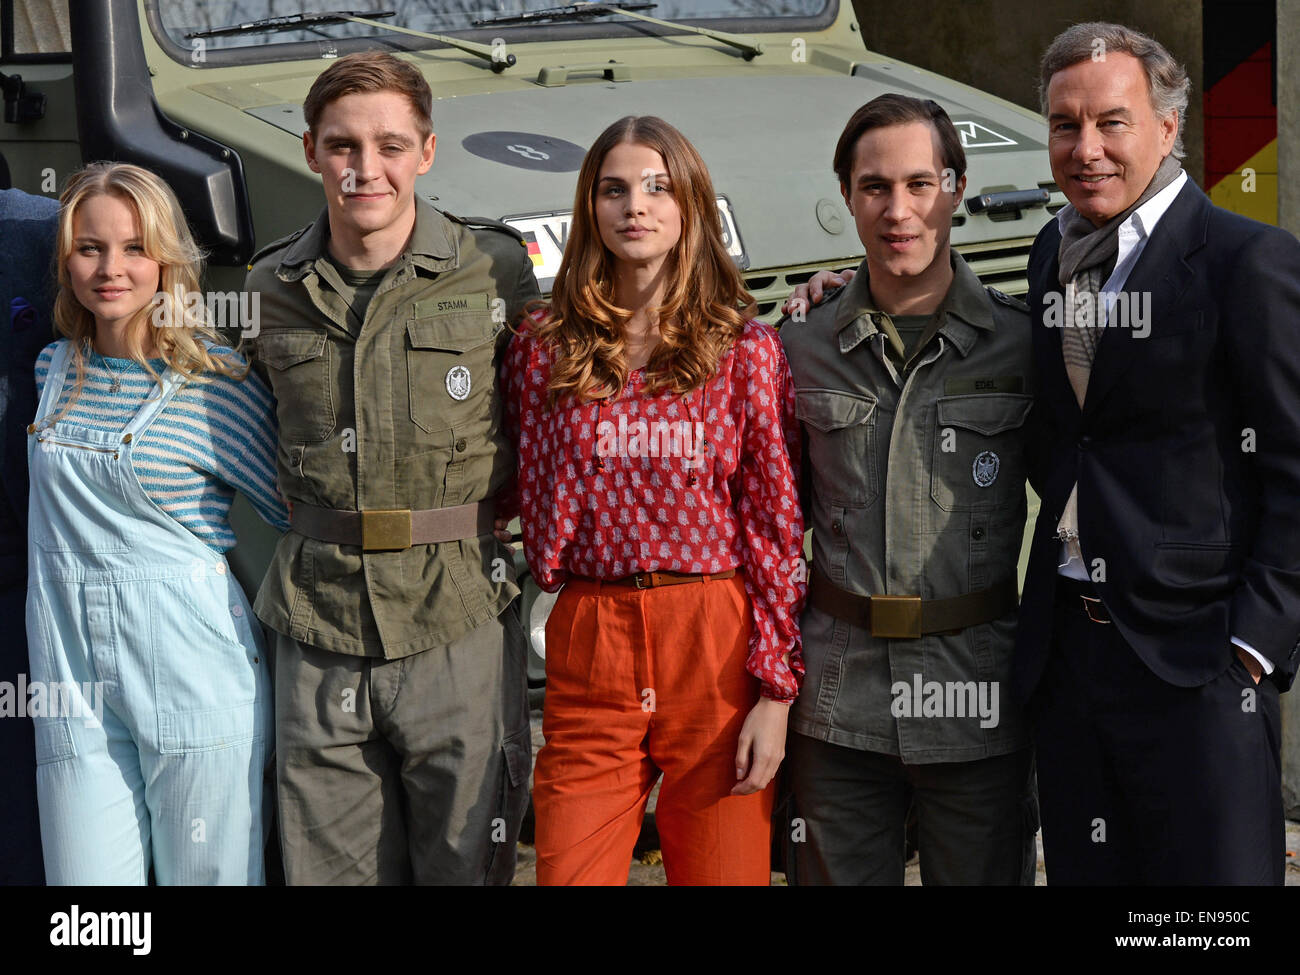 Actors (l-r) Sonja Gerhardt, Jonas Nay, Lisa Tomaschewsky, Ludwig Trepte and producer Nico Hofmann smile during a photo session on the set of 'Germany!', an eight-episode RTL series in Potsdam (Brandenburg), Germany, 03 November 2014. The filming of the series started on 25 August in and around Berlin and tells a German-German history from 1983. Photo: Ralf Hirschberger/dpa Stock Photo